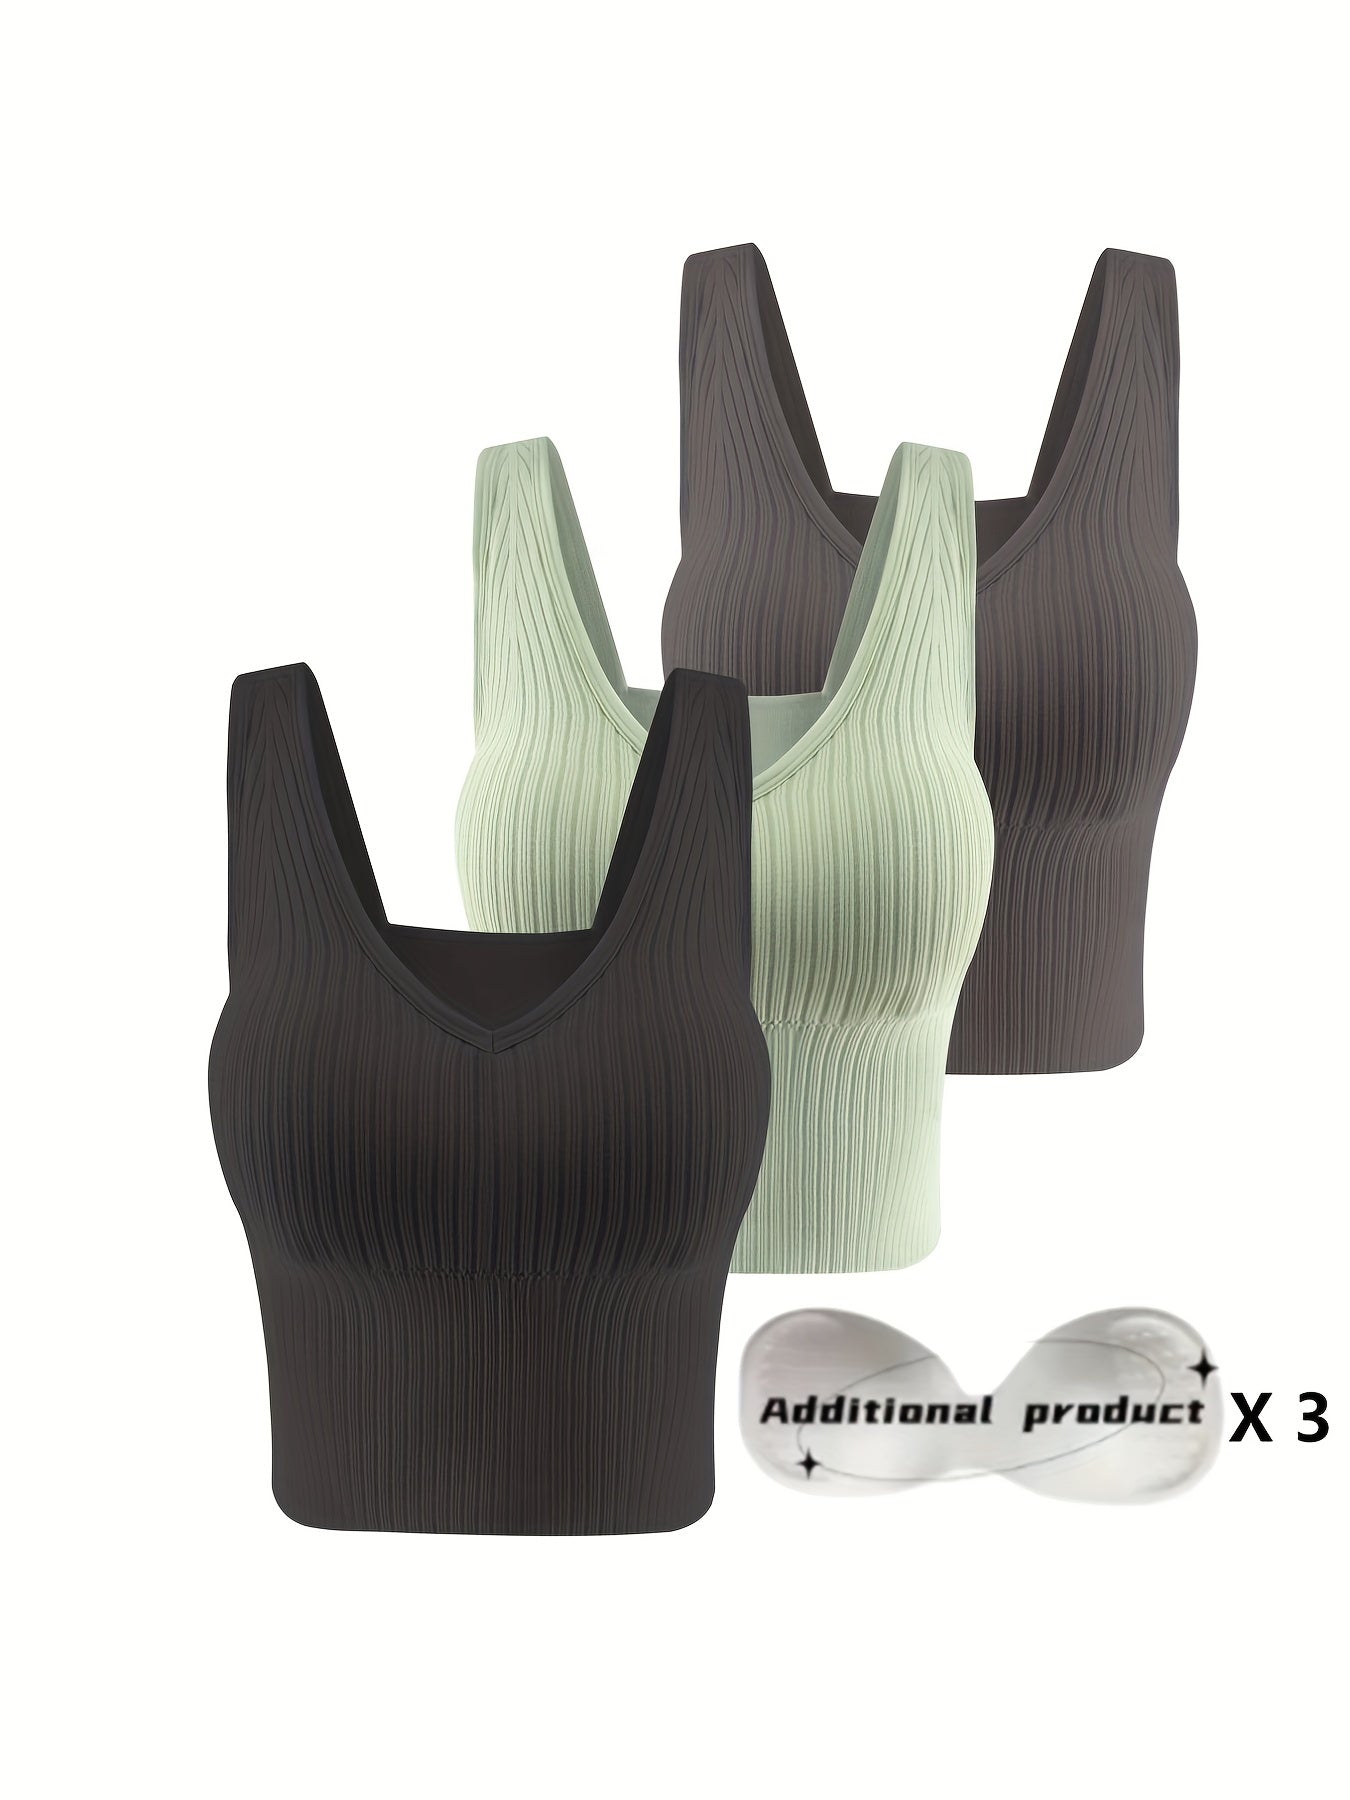 3pcs Ribbed Tank Top, Casual & Comfortable Wireless Vest Bra With Detachable Chest Pads, Women's Lingerie & Underwear